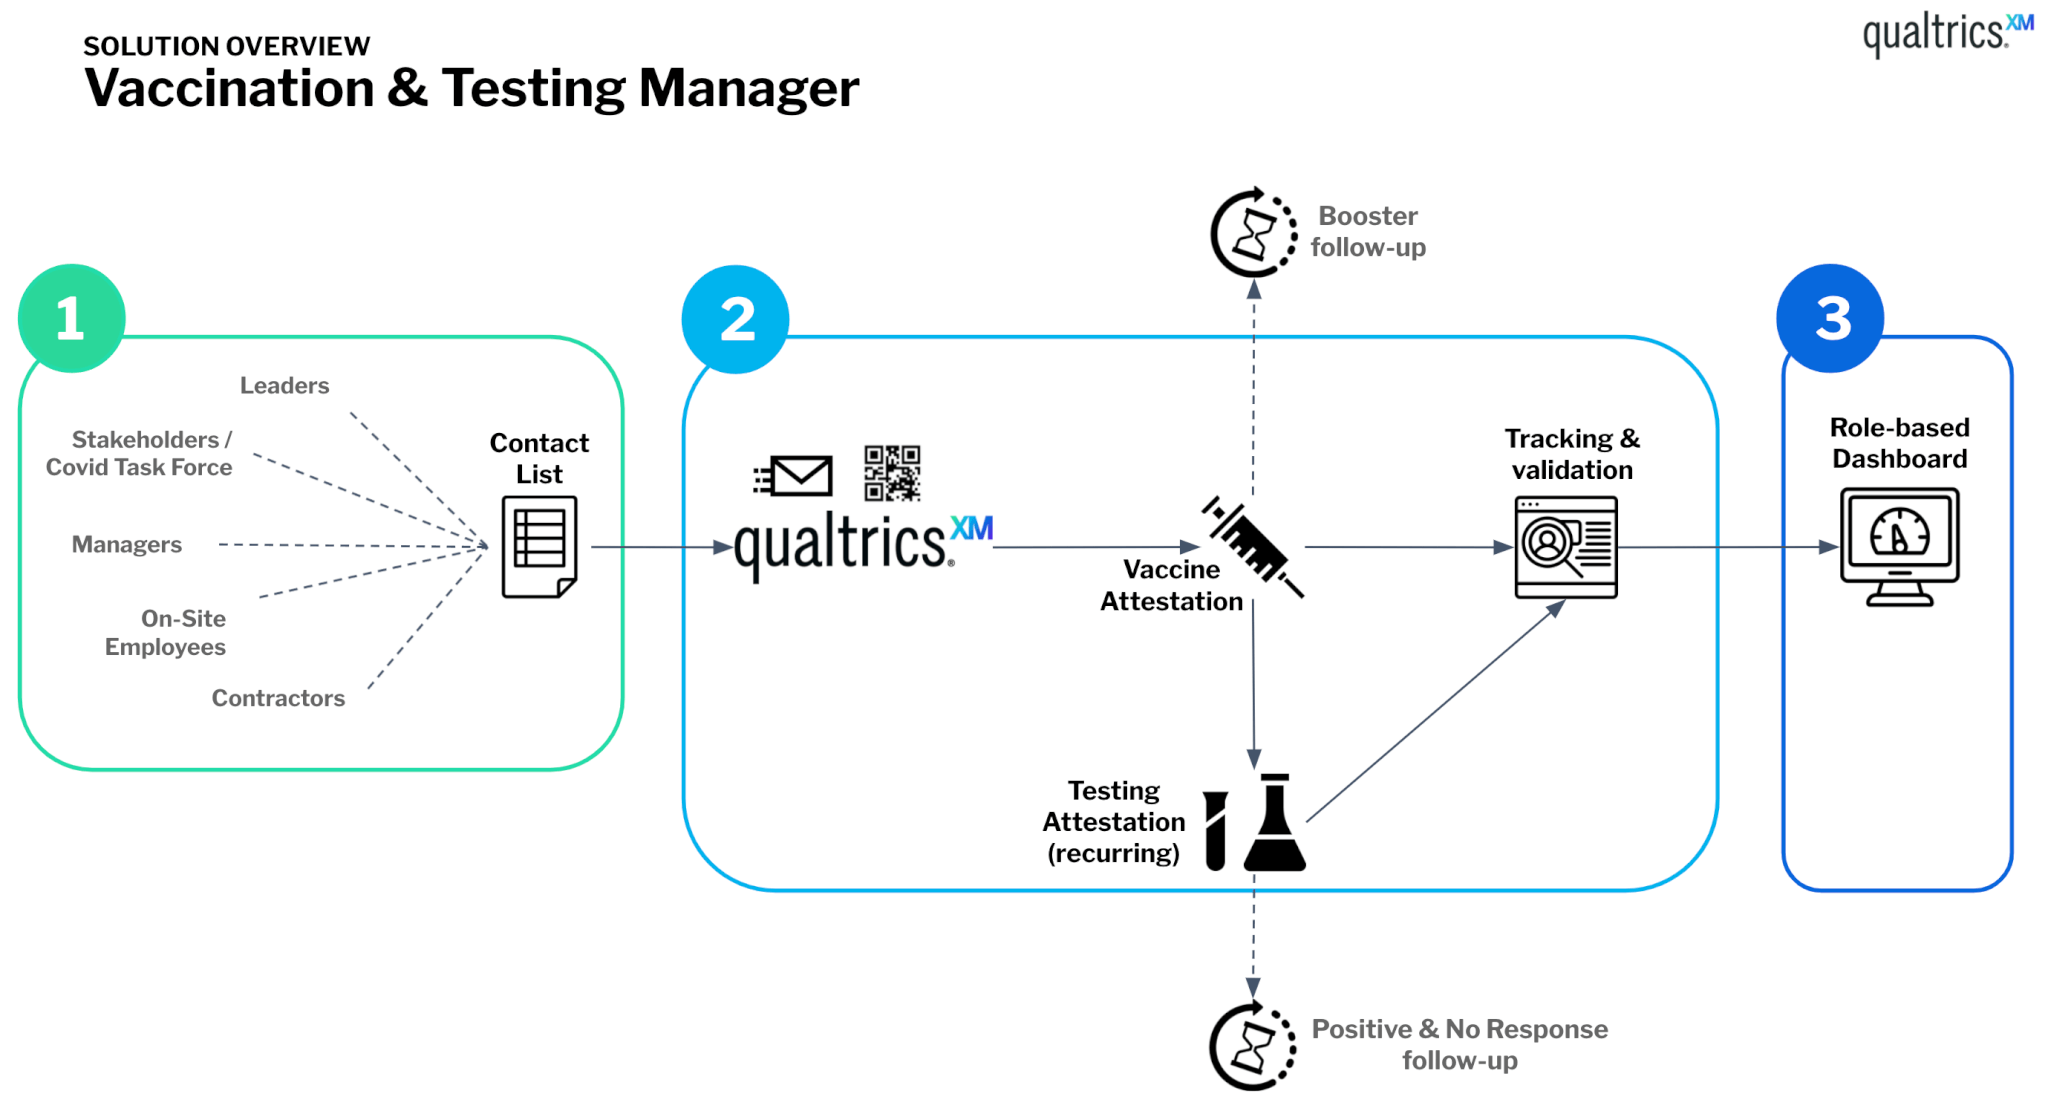 Solution overview: Vaccination and testing manager